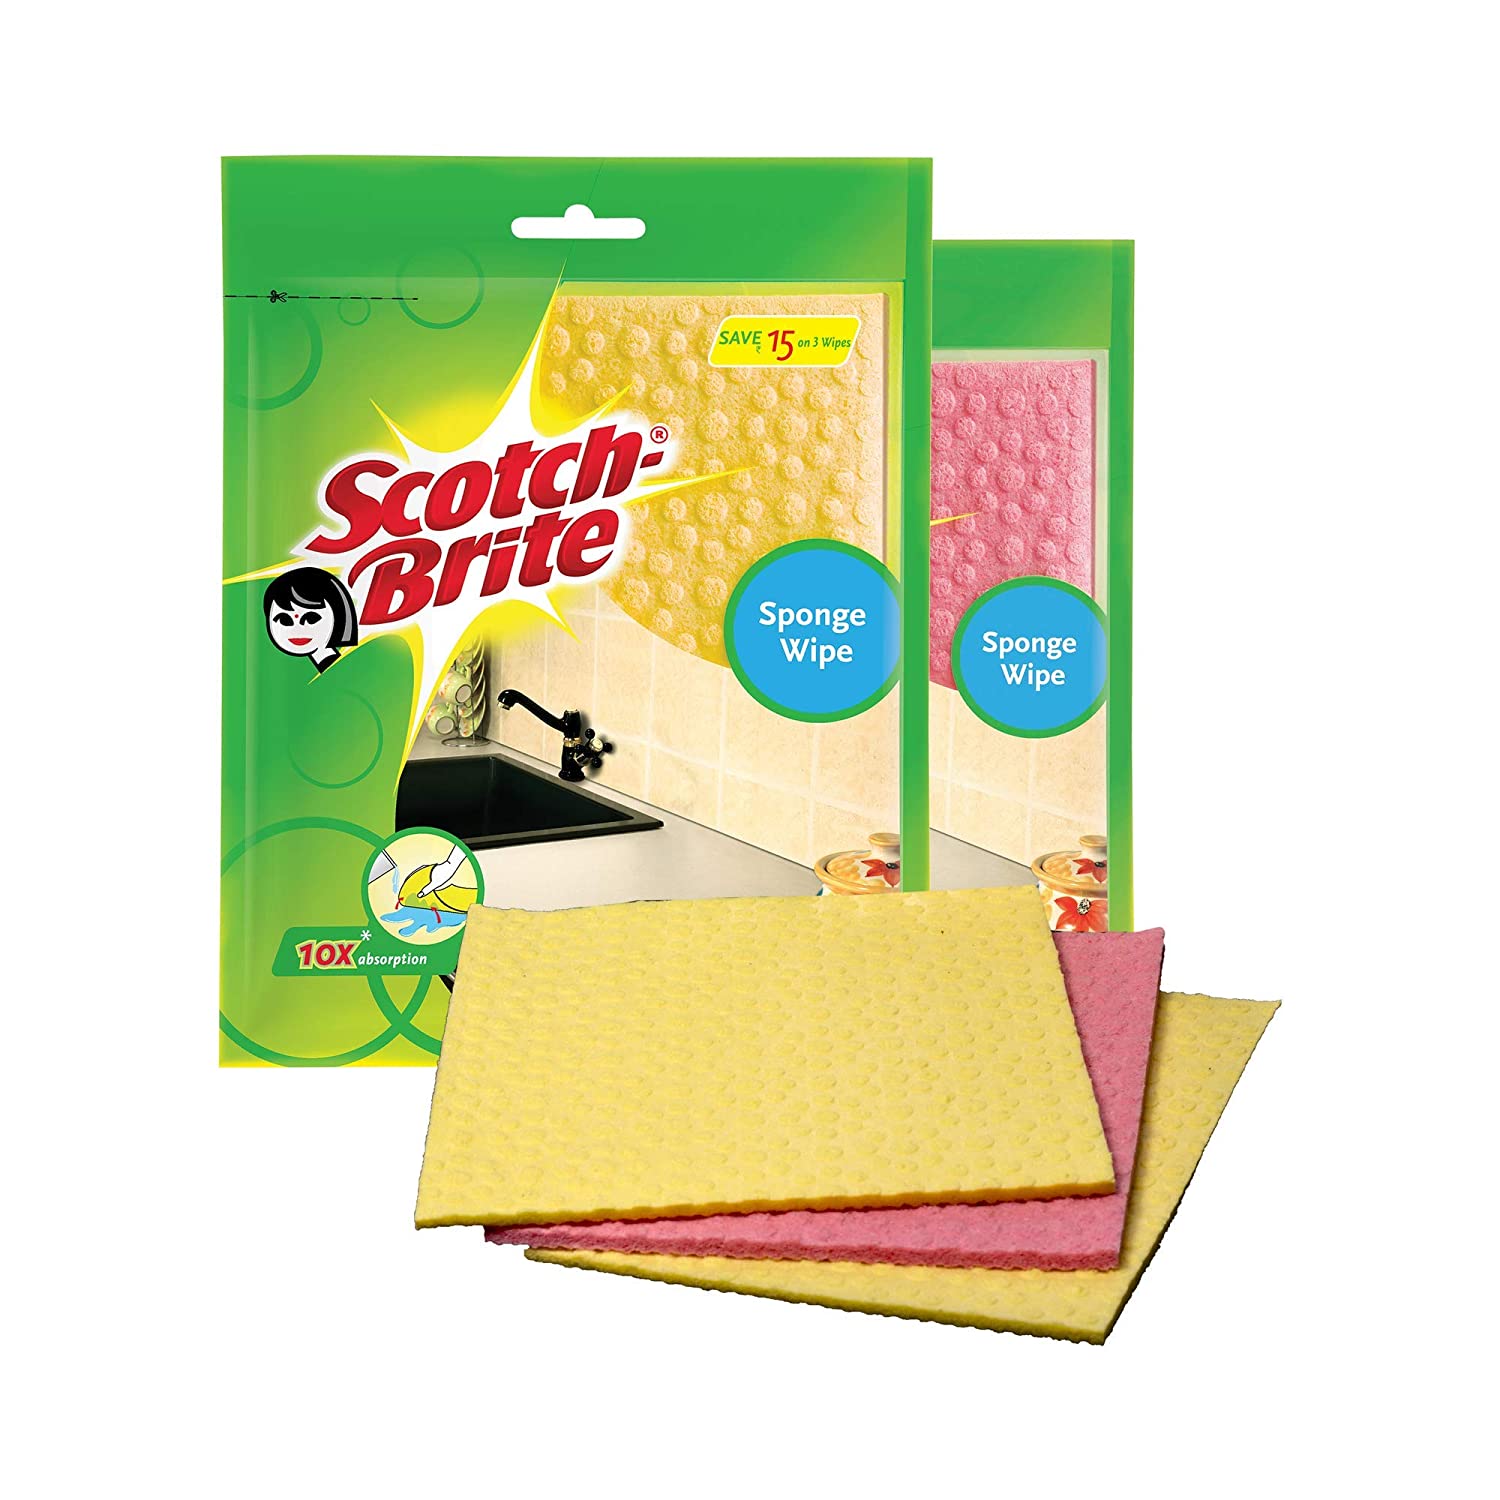 Scotch-Brite Sponge Wipe, Pack of 3 (Color May Vary)